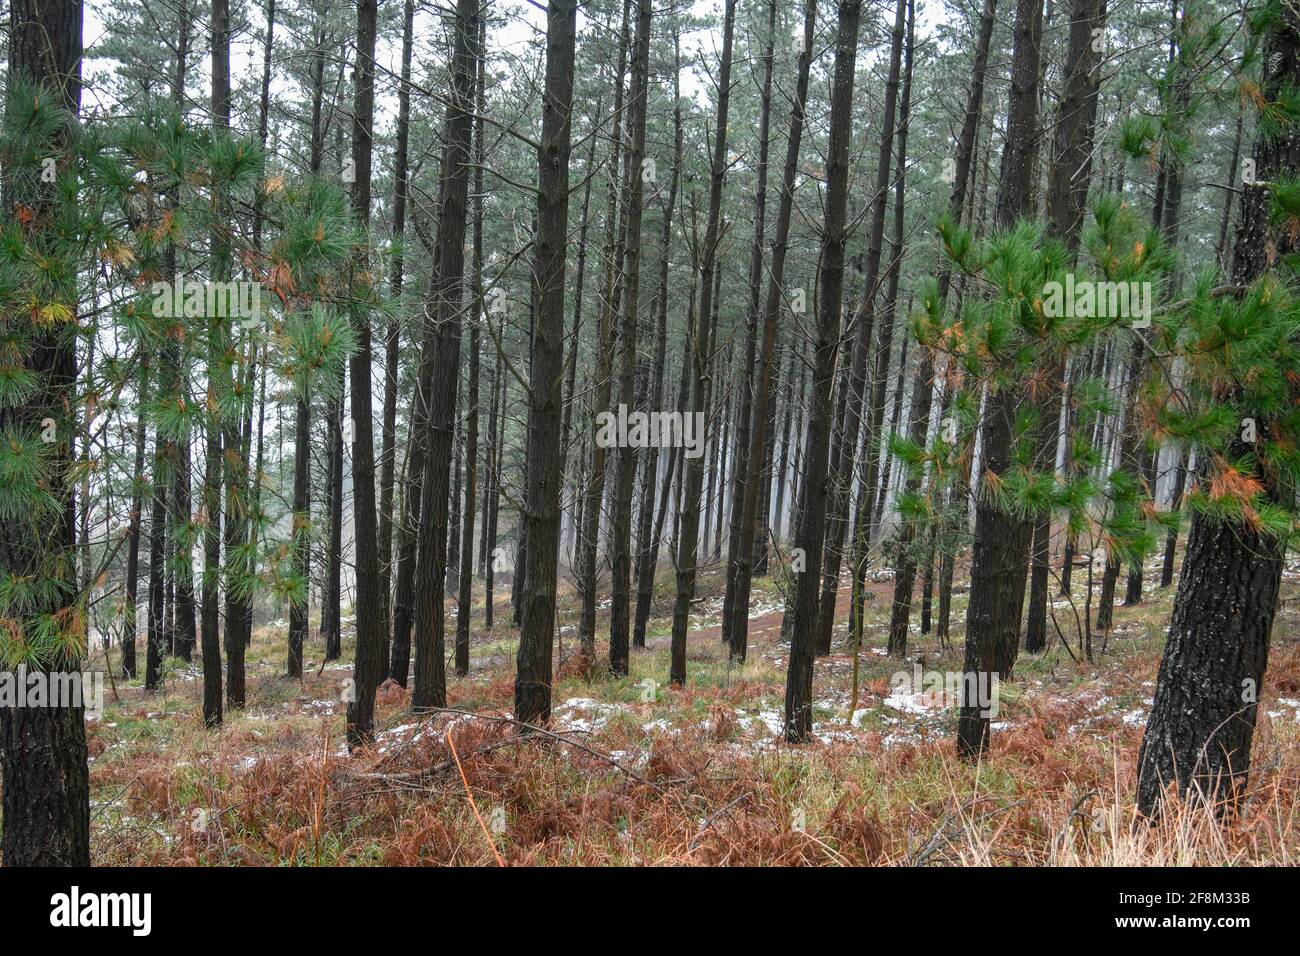 Silhouetted Tree Trunks in a Pine Forest Stock Photo